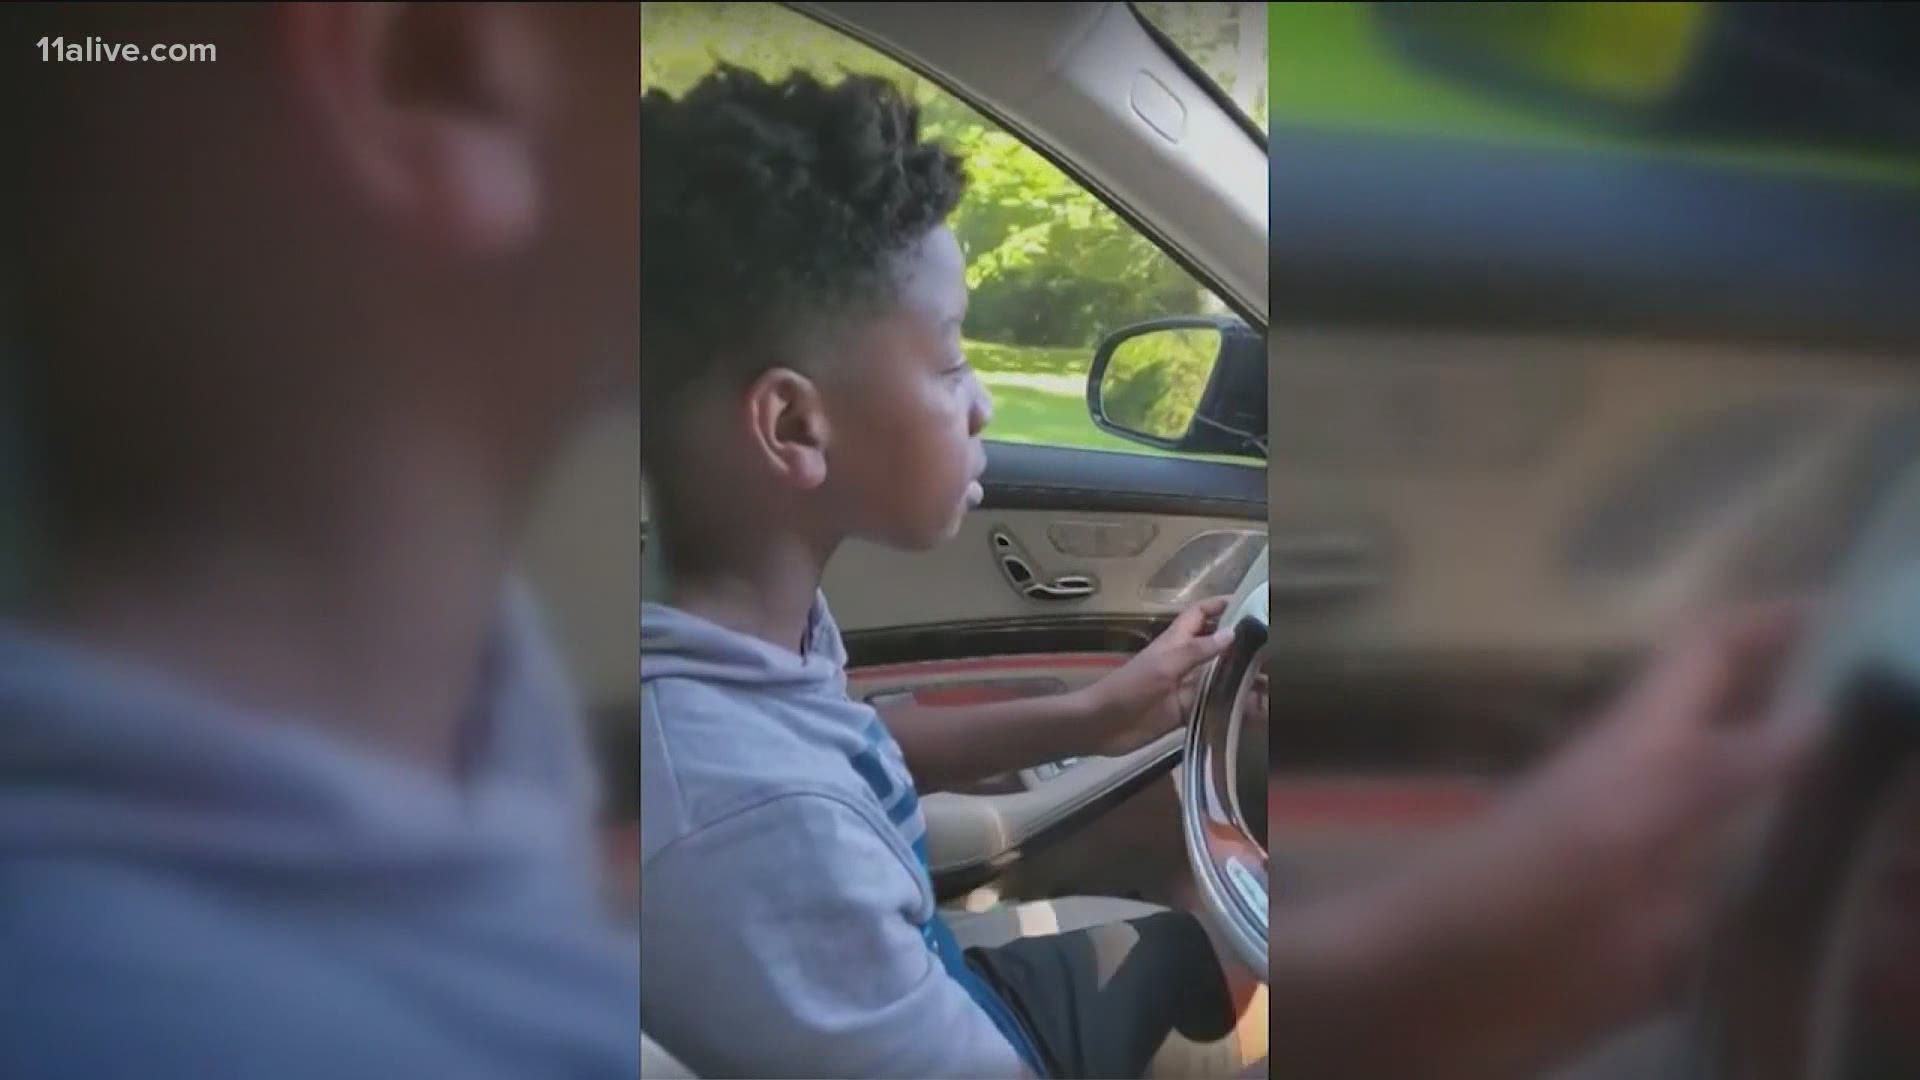 11-year-old PJ didn't hesitate when he saw his Grandma struggling. He leaped into action, and behind the wheel to save her!